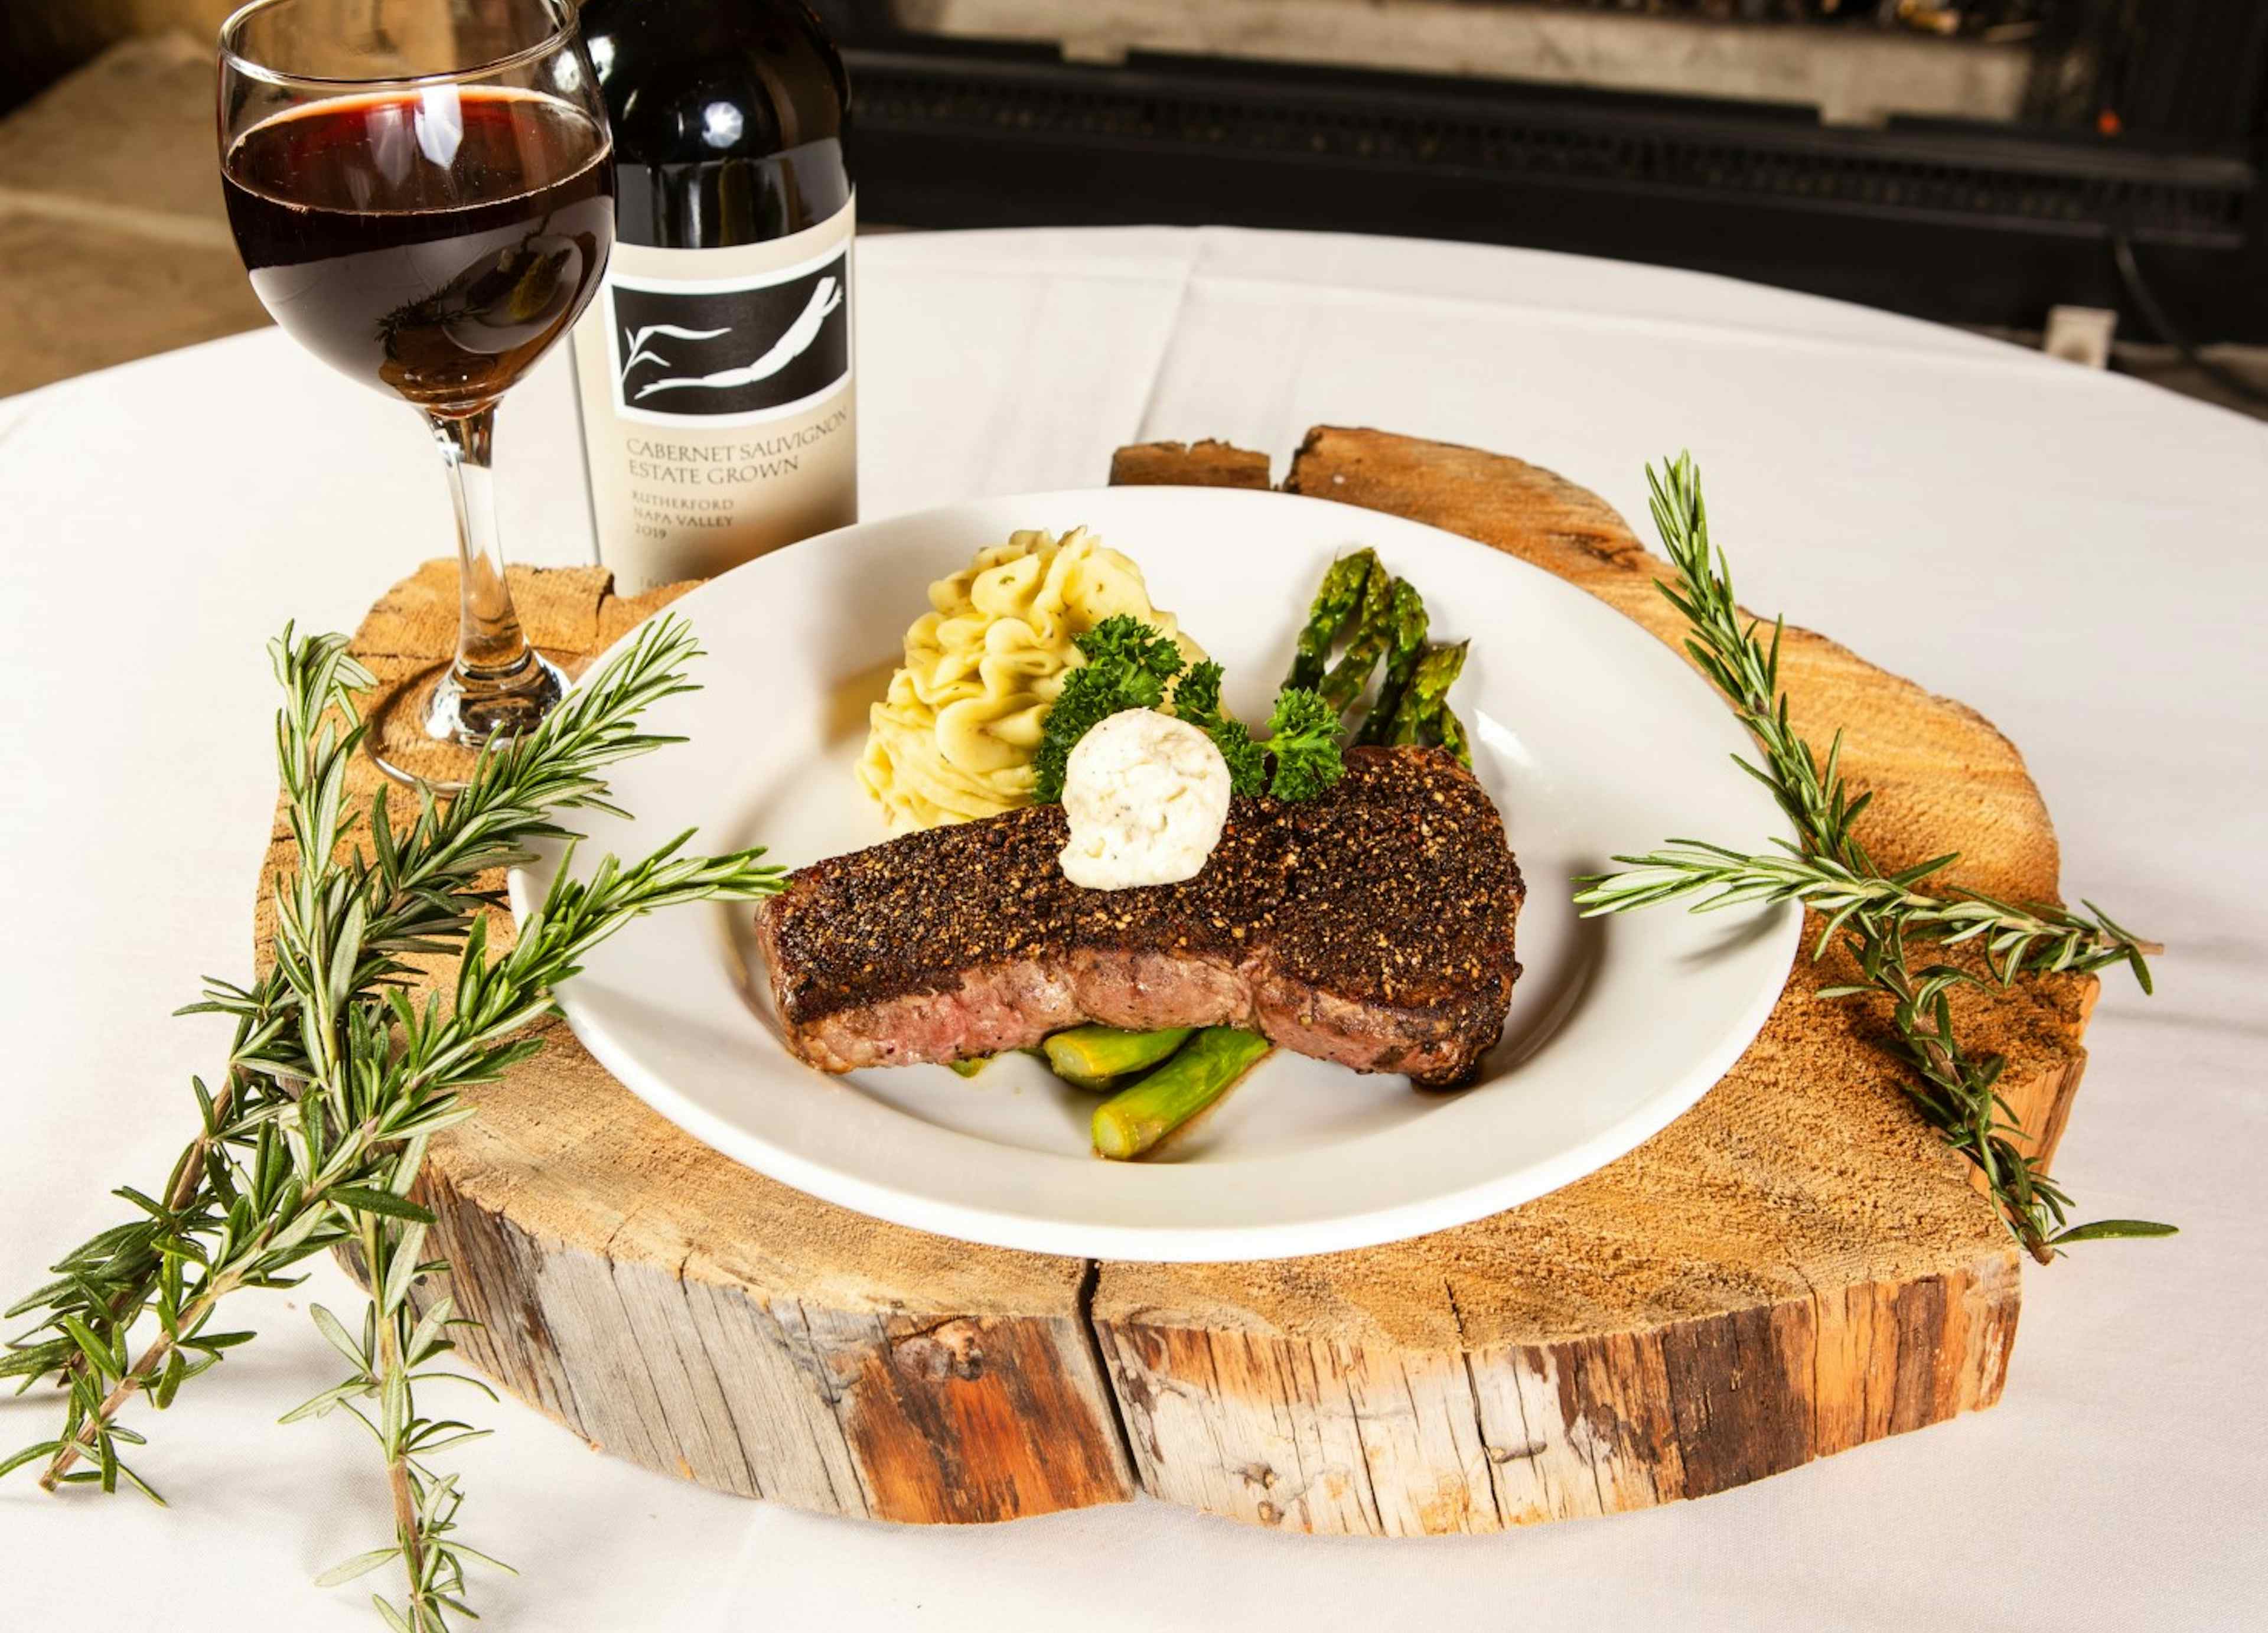 Steak with mashed potatoes and asparagus, served with a glass of red wine, offered at the Flying Saddle Steakhouse.